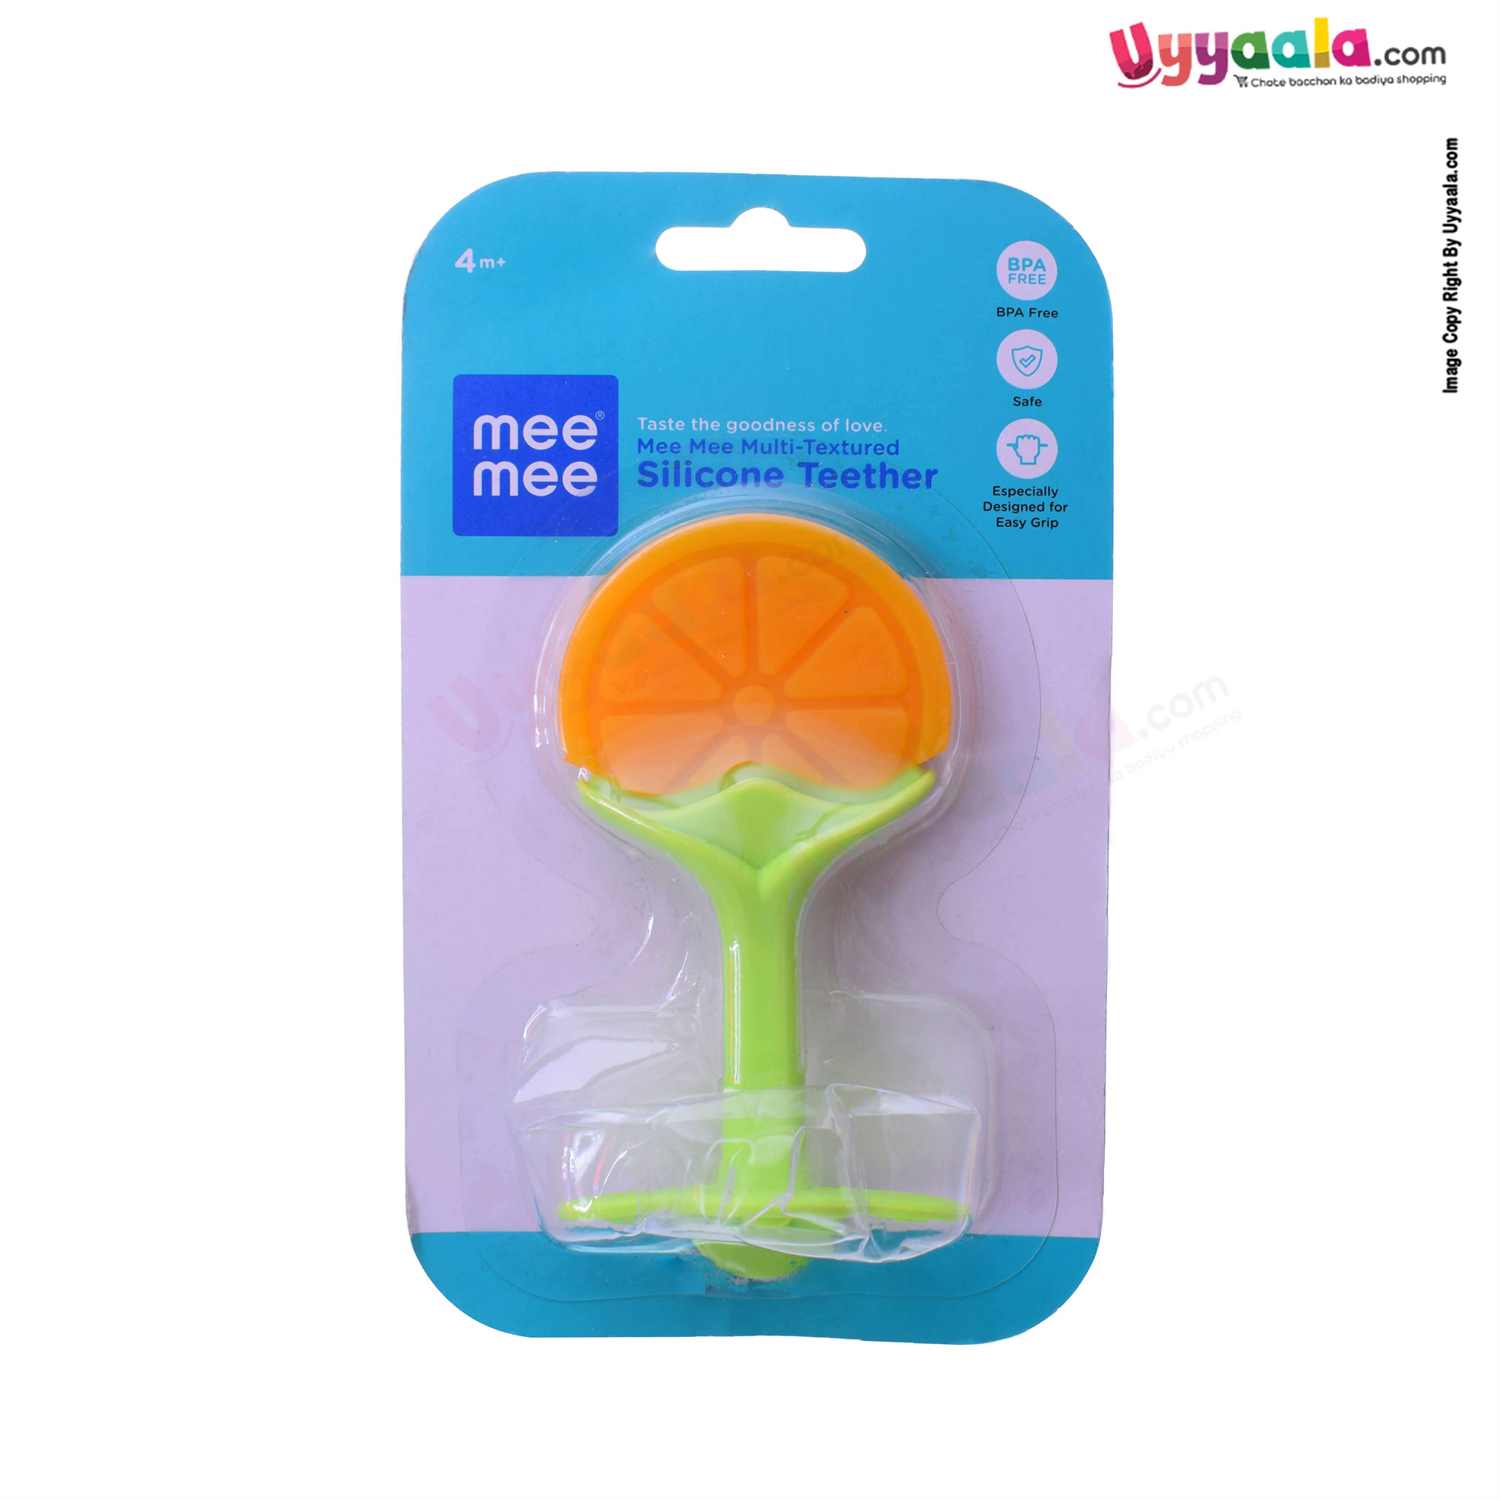 MEE MEE Silicone Textured Teether For Babies 4+m Age - Orange, Green